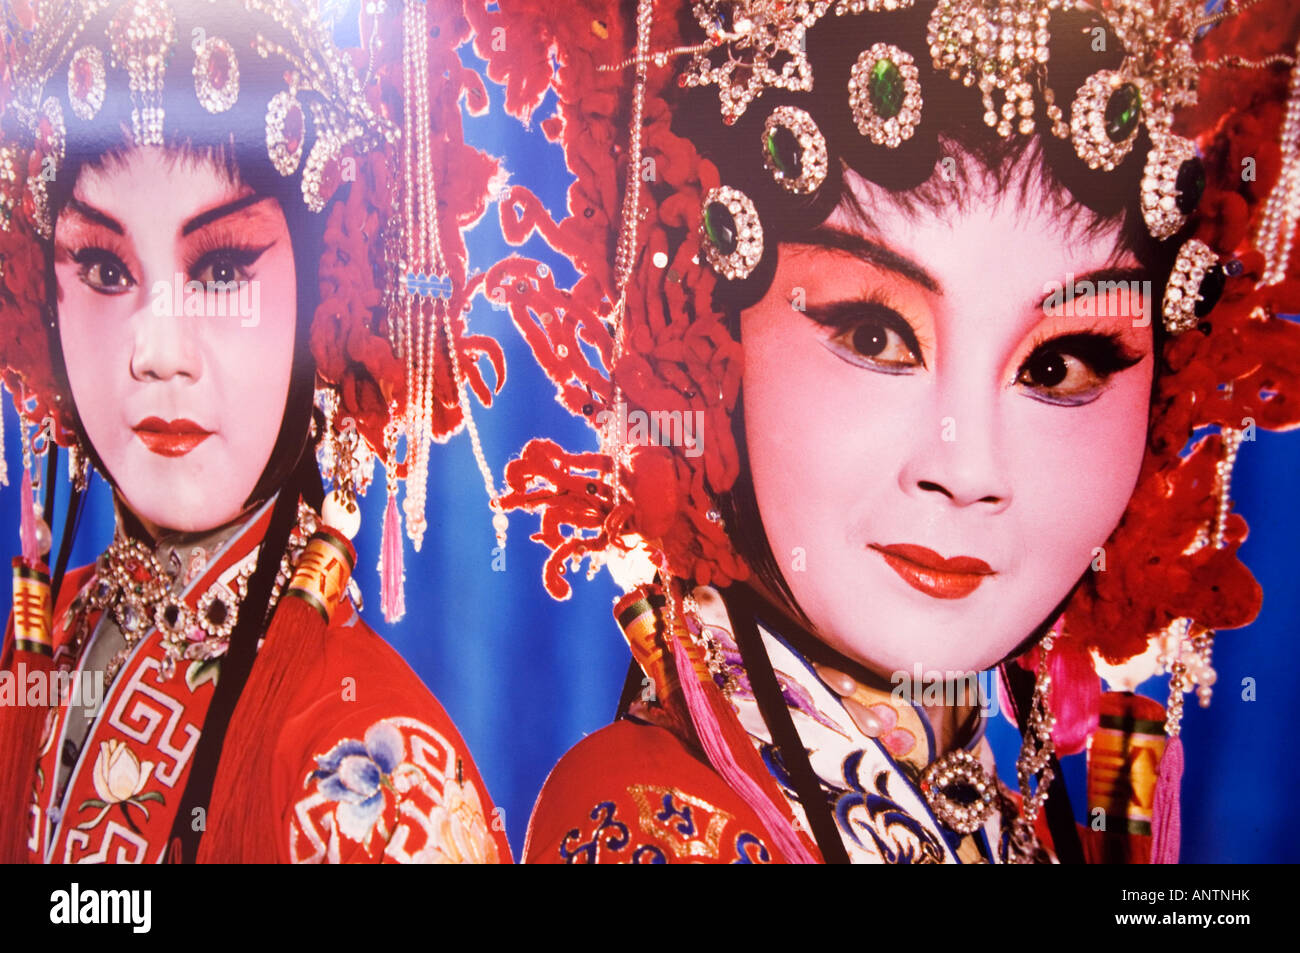 exhibition of Beijing Opera photographs at Three Shadows art gallery in Caochangdi art district Beijing China Stock Photo